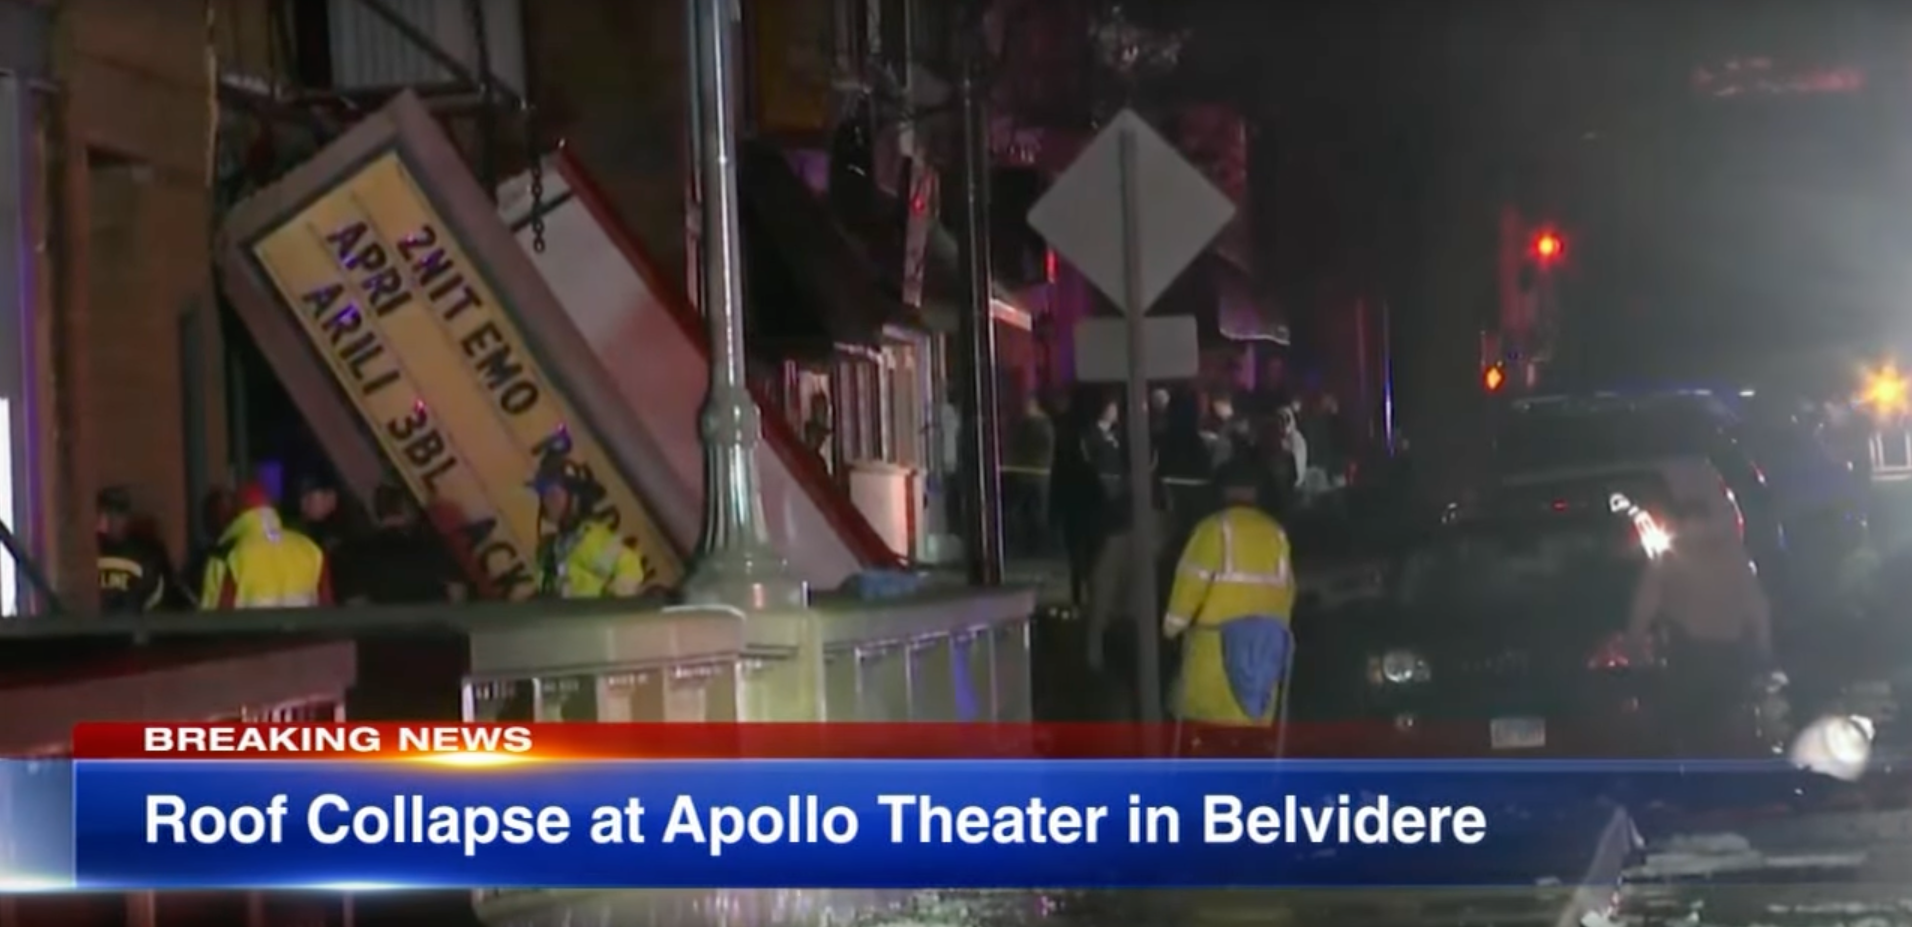 Theater roof collapses during sold-out show; tornadoes, severe storms rip Midwest, South killing at least 7